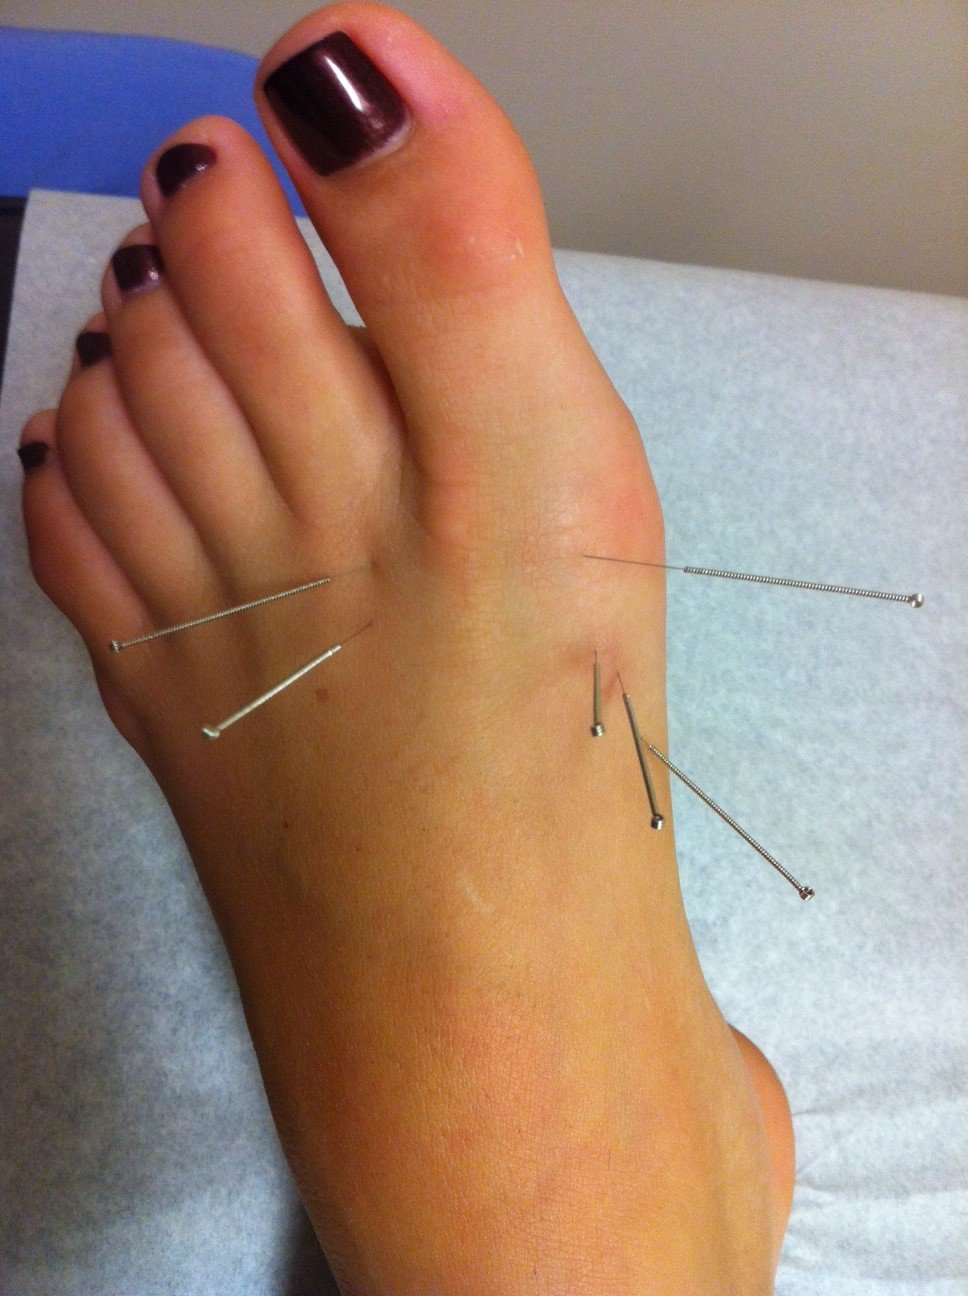 Acupuncture And Gout: Can Acupuncture Really Help With ...